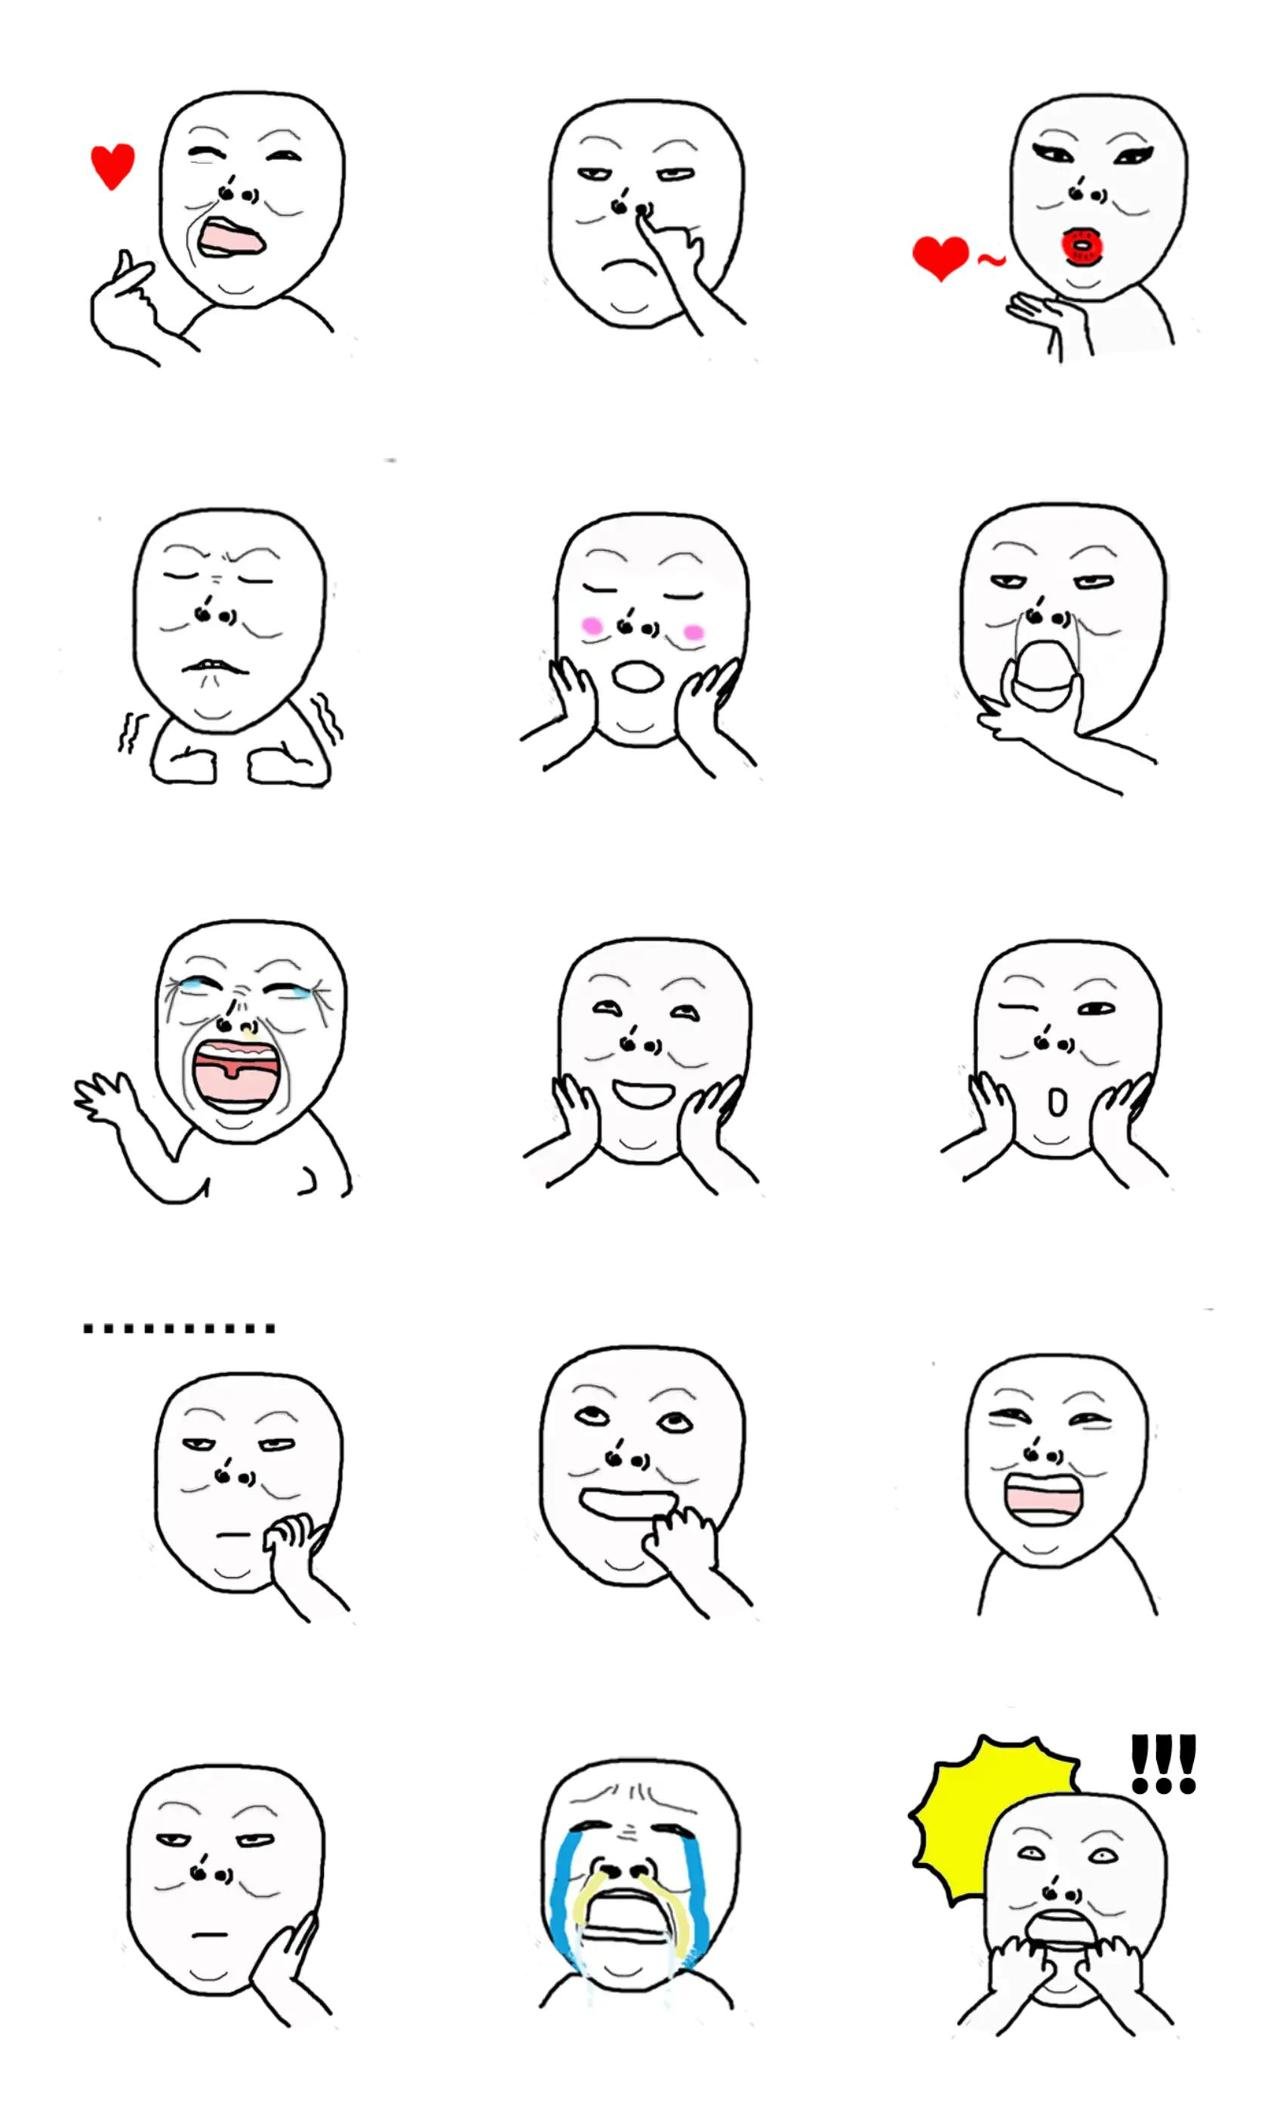 Emotional Big Head Gag sticker pack for Whatsapp, Telegram, Signal, and others chatting and message apps